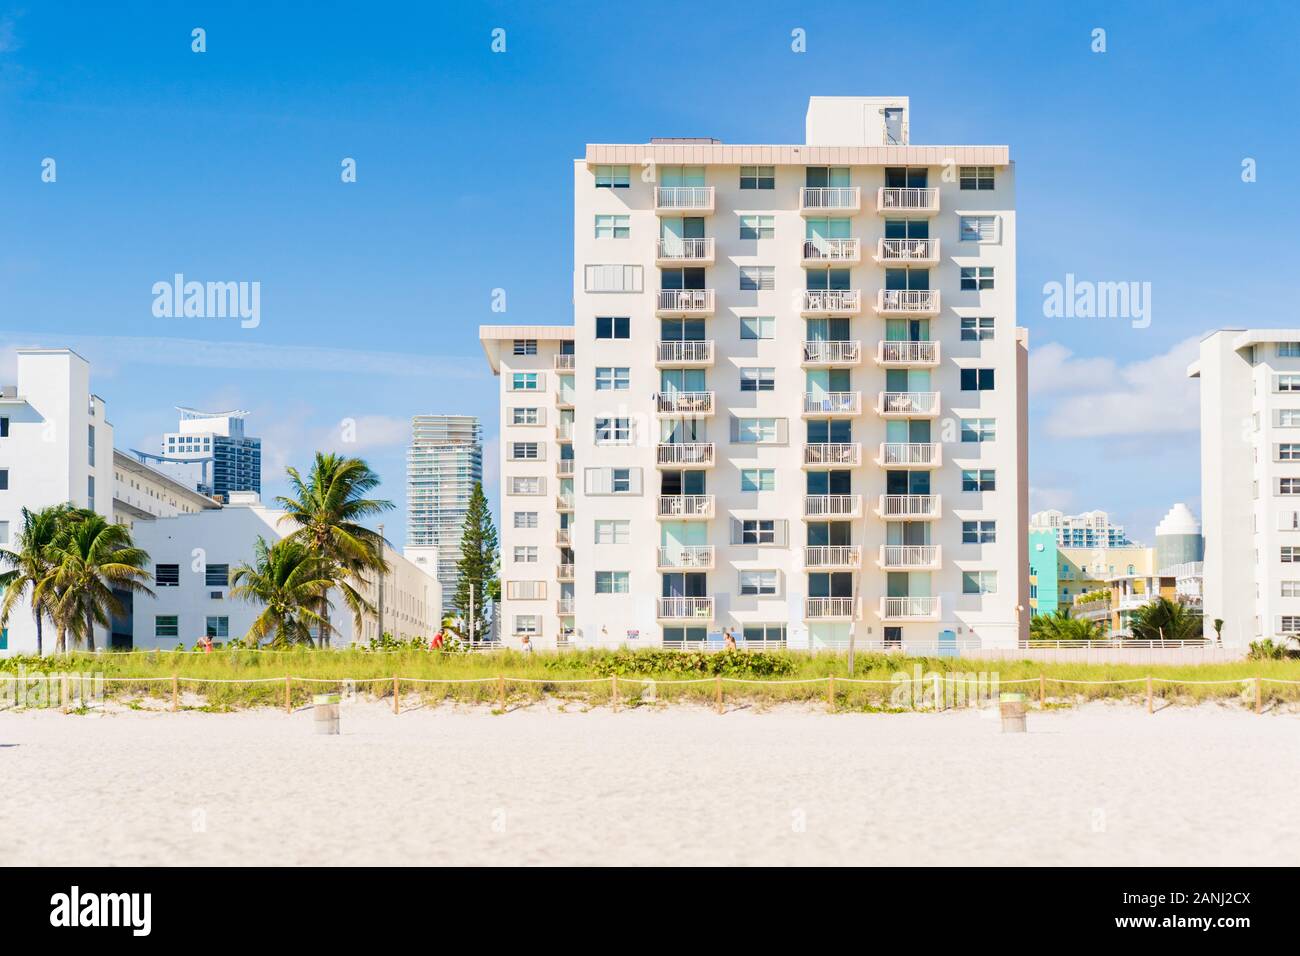 White Beach Front Buildings in South Beach, Florida. Stockfoto